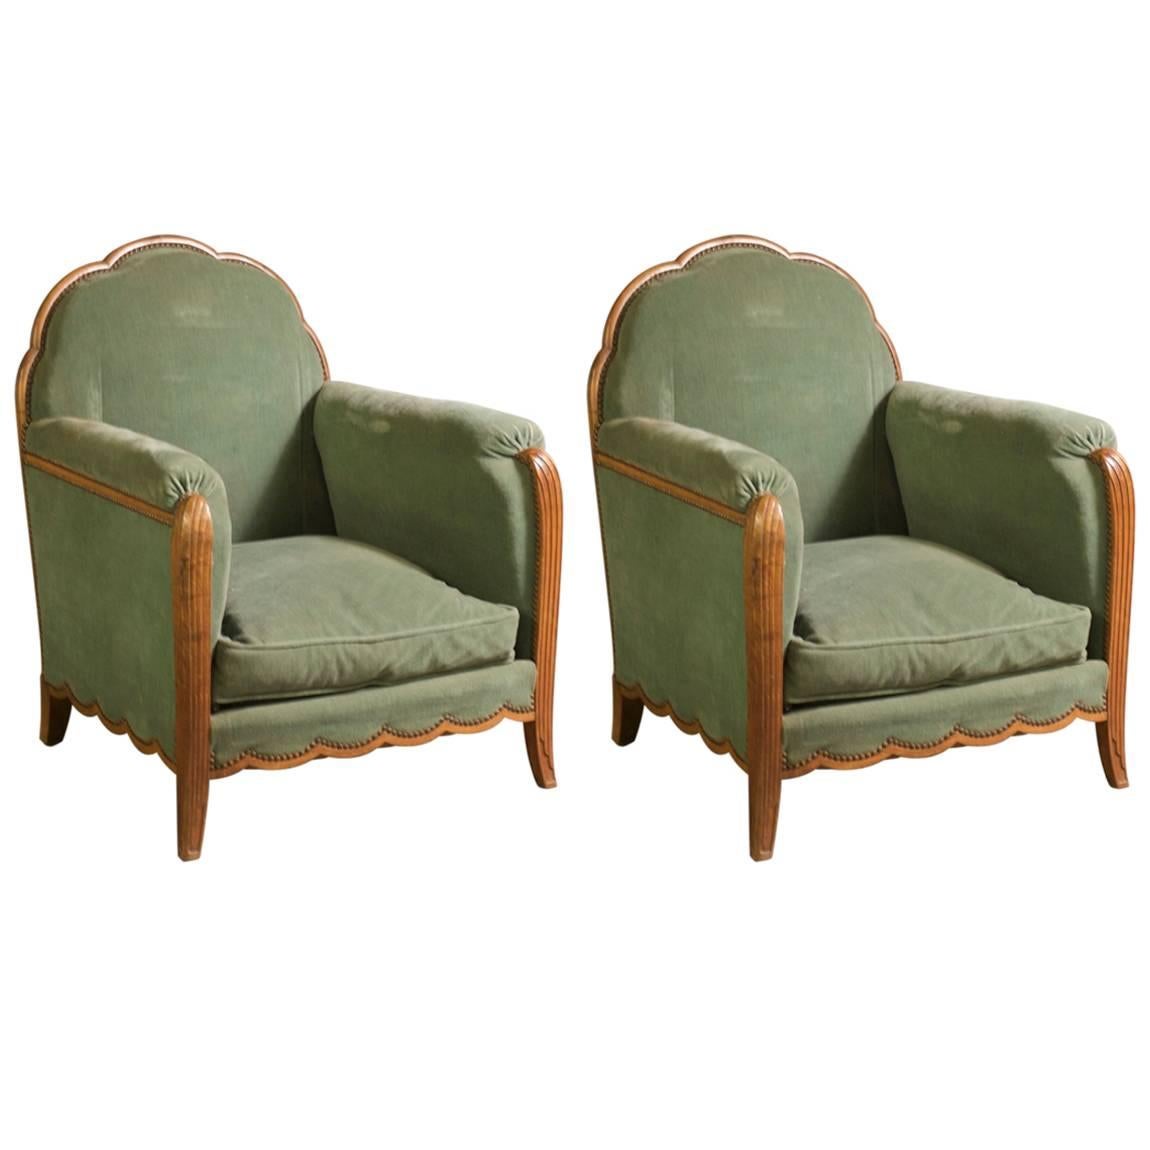 Andre Frechet Pair of 1920s Club Chairs